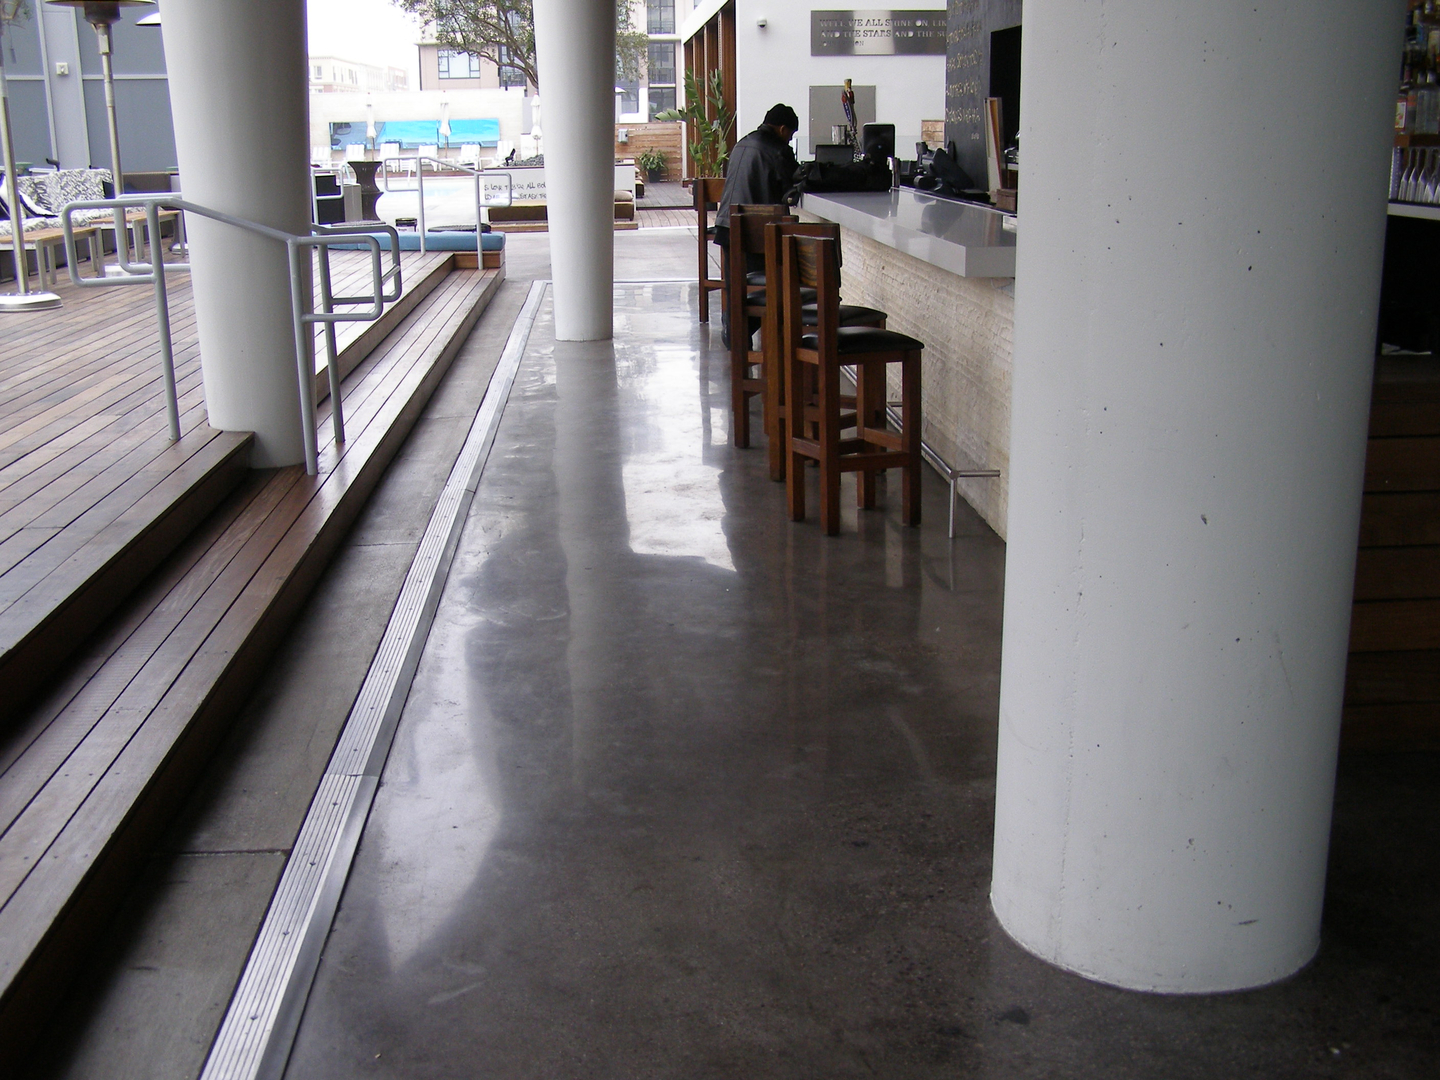 A Bar Space With Big White Pillars